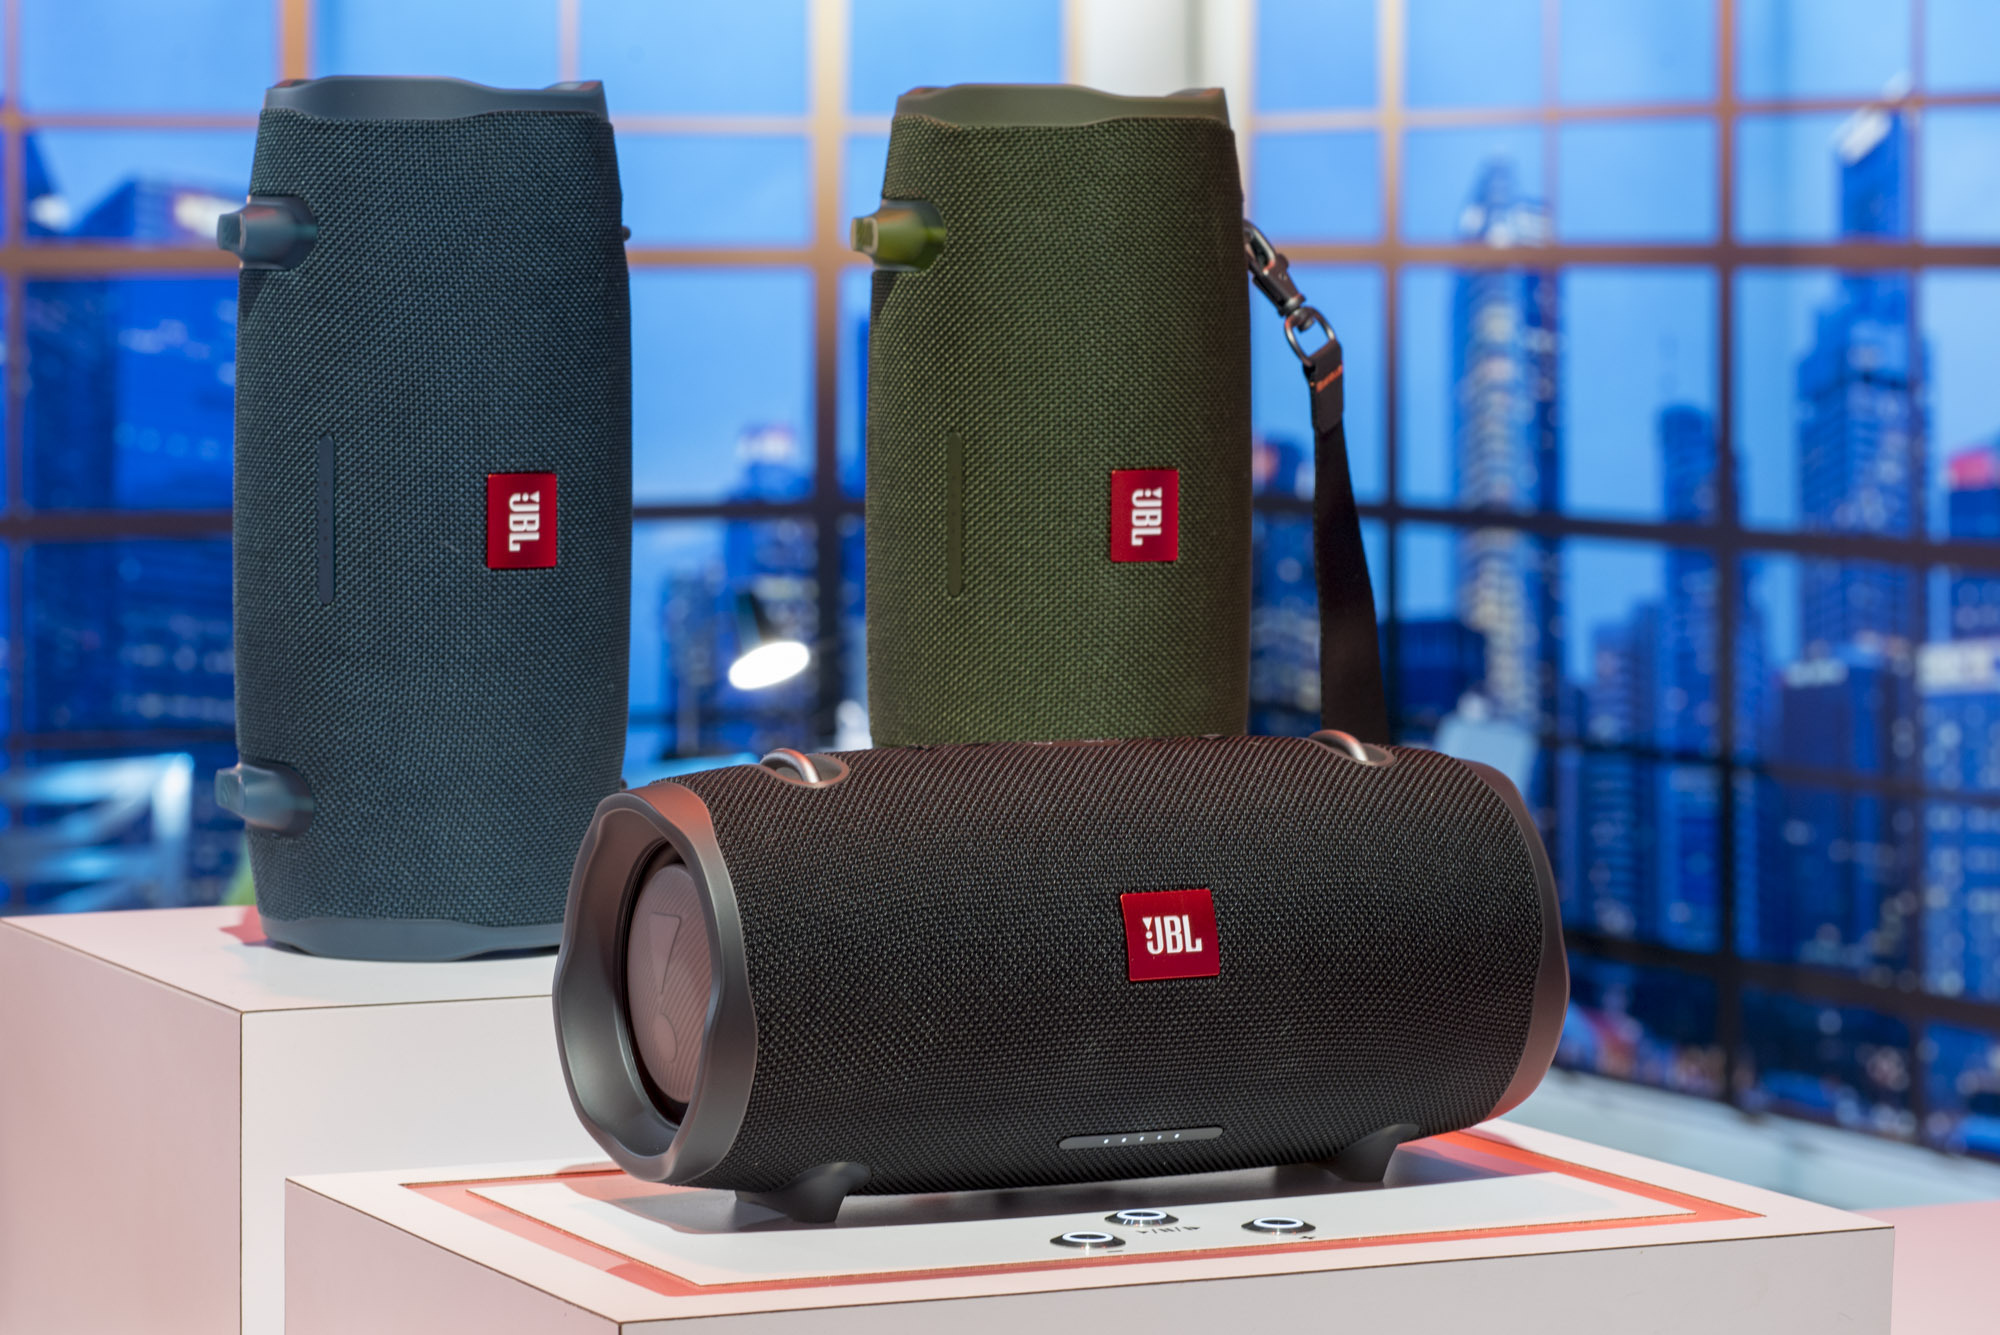 The JBL® Xtreme 2 Makes Waves with its Audio Performance and Durable, Fully Waterproof Design | Business